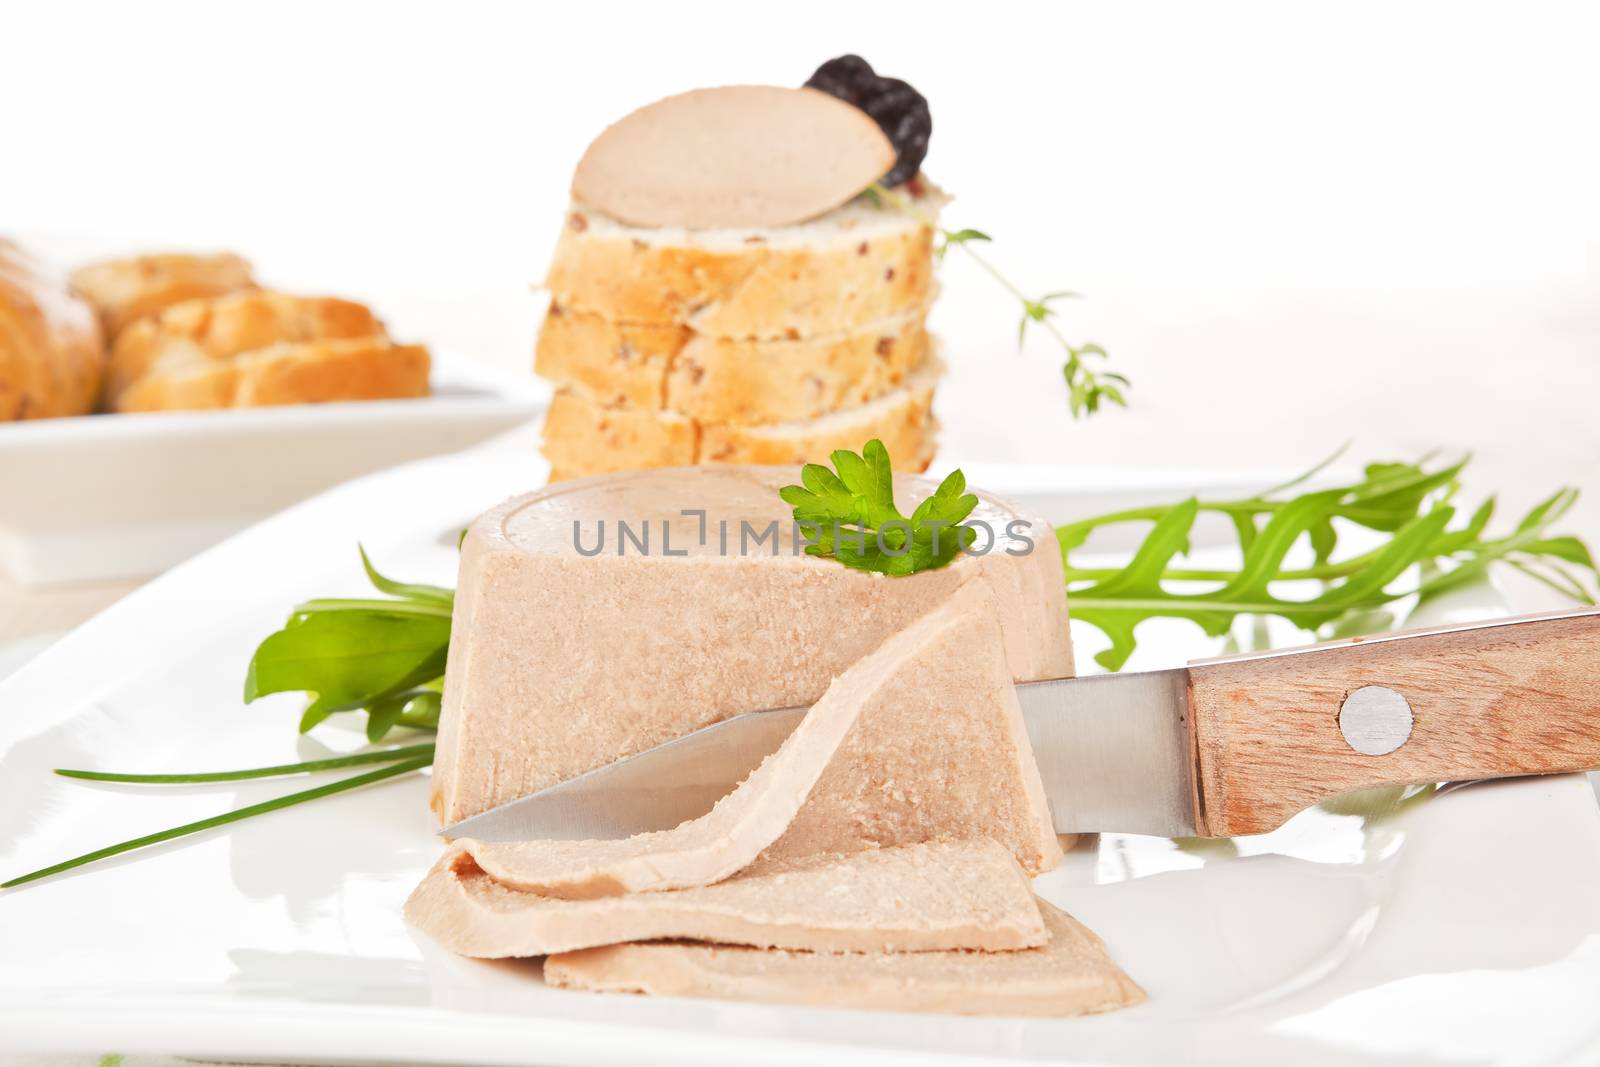 Delicious pate on white plate. Pastry in background. Culinary gourmet eating.